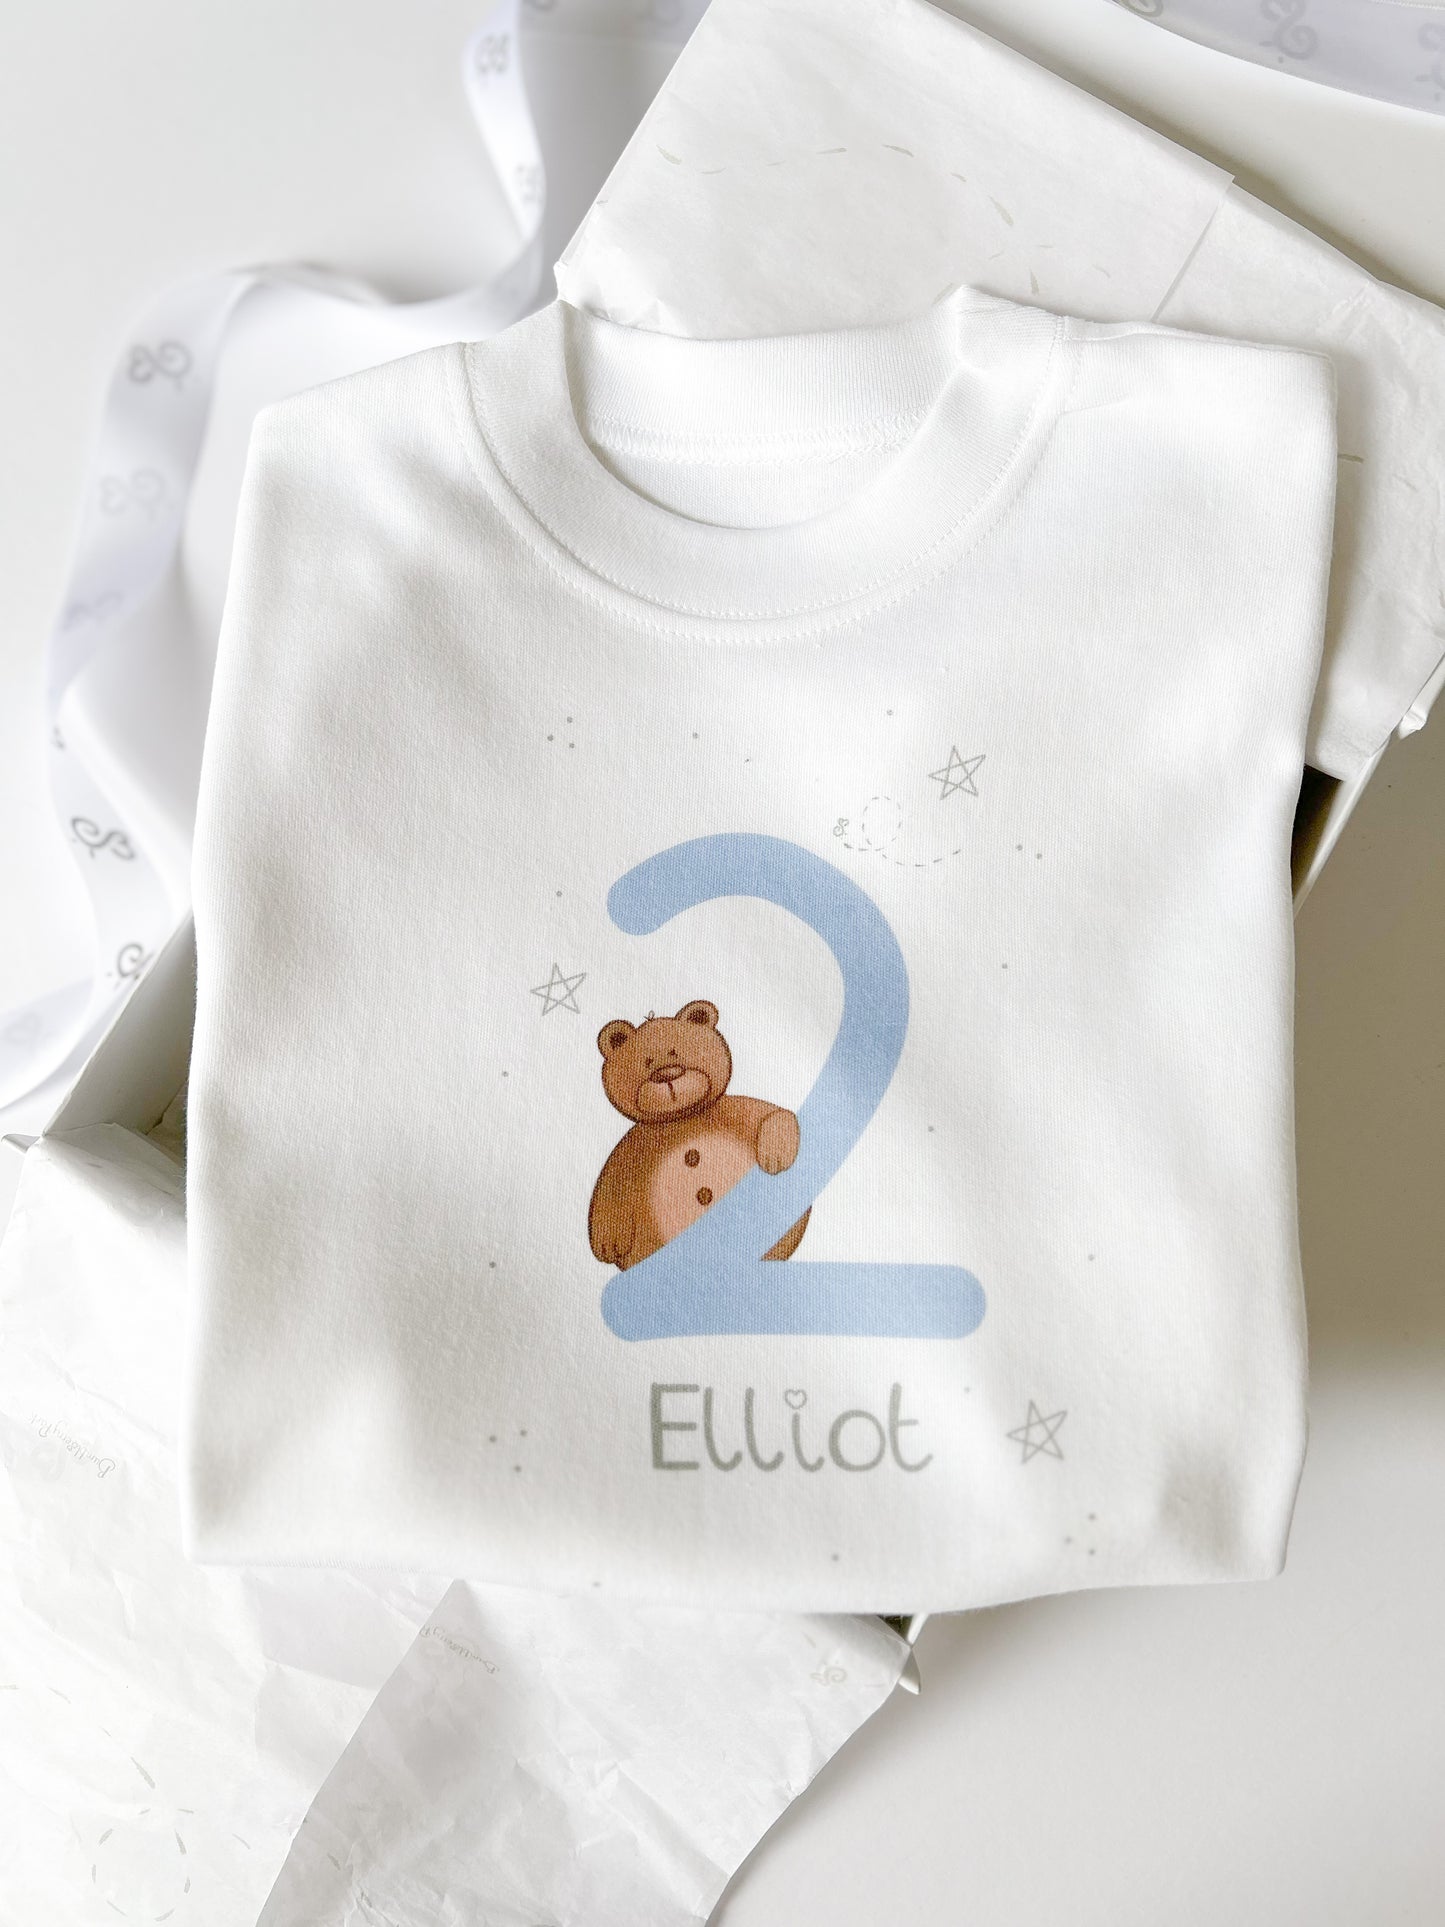 boys 2nd birthday top with cute teddy bear print and number 2 with boys name in grey